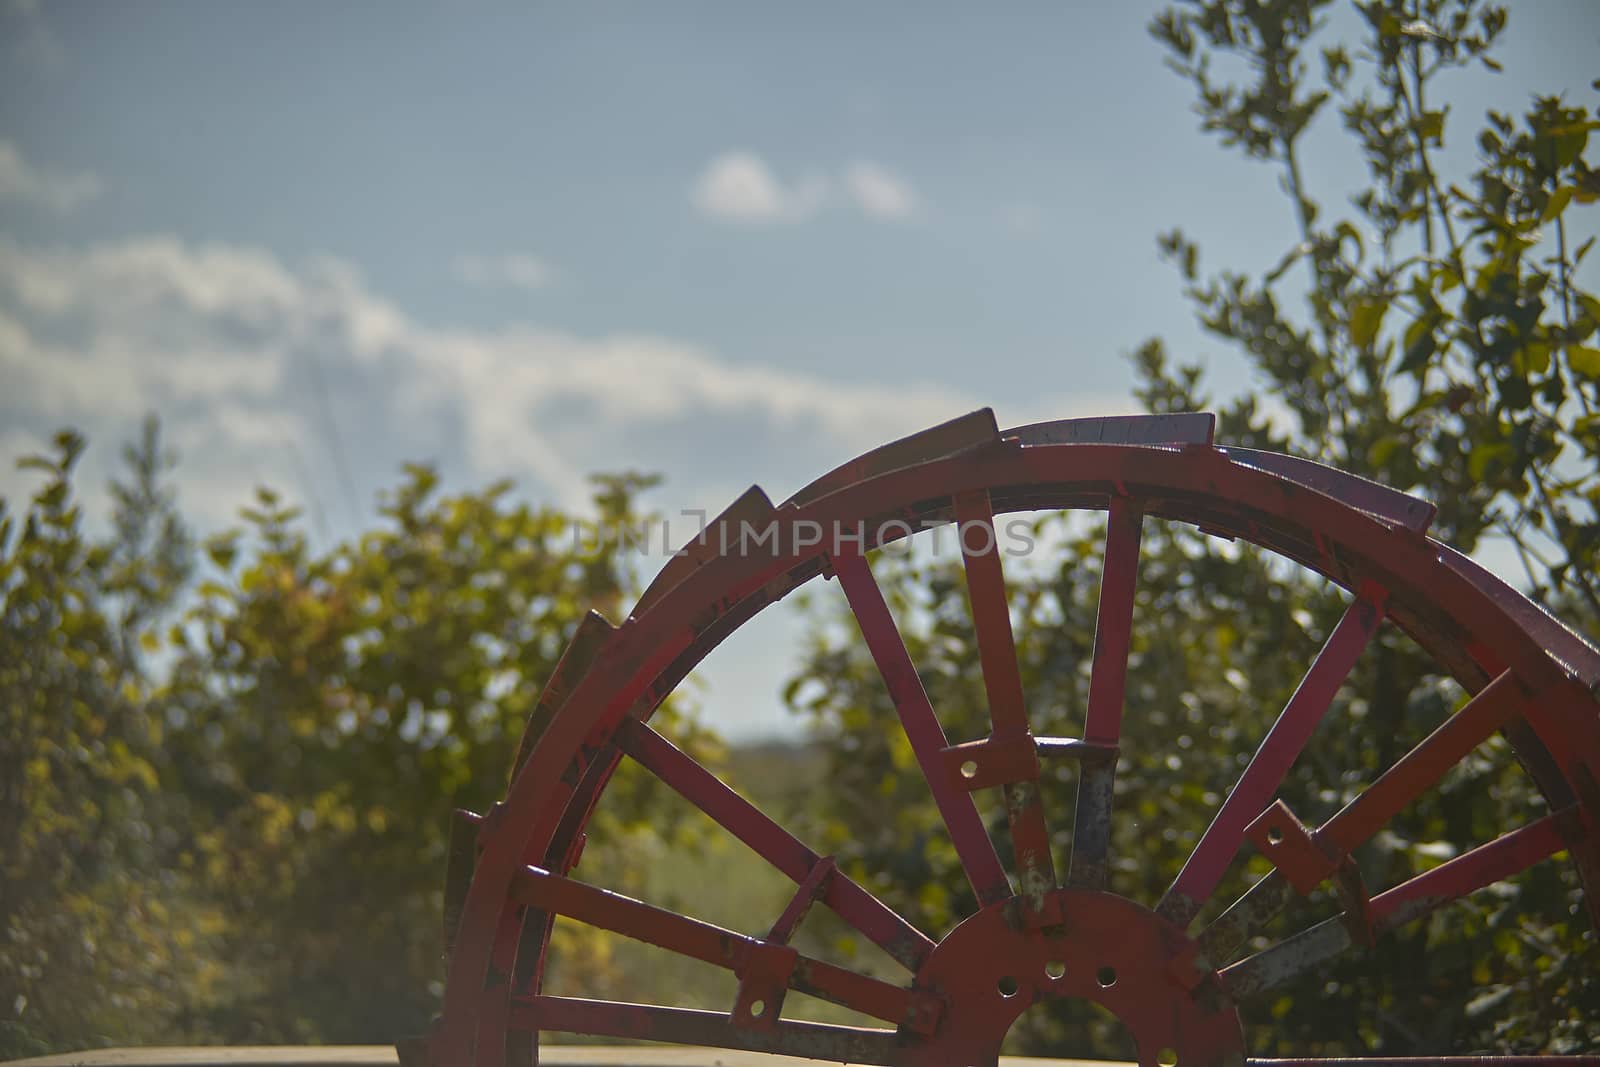 metal wheel for agricultural tractors, rural background. by pippocarlot